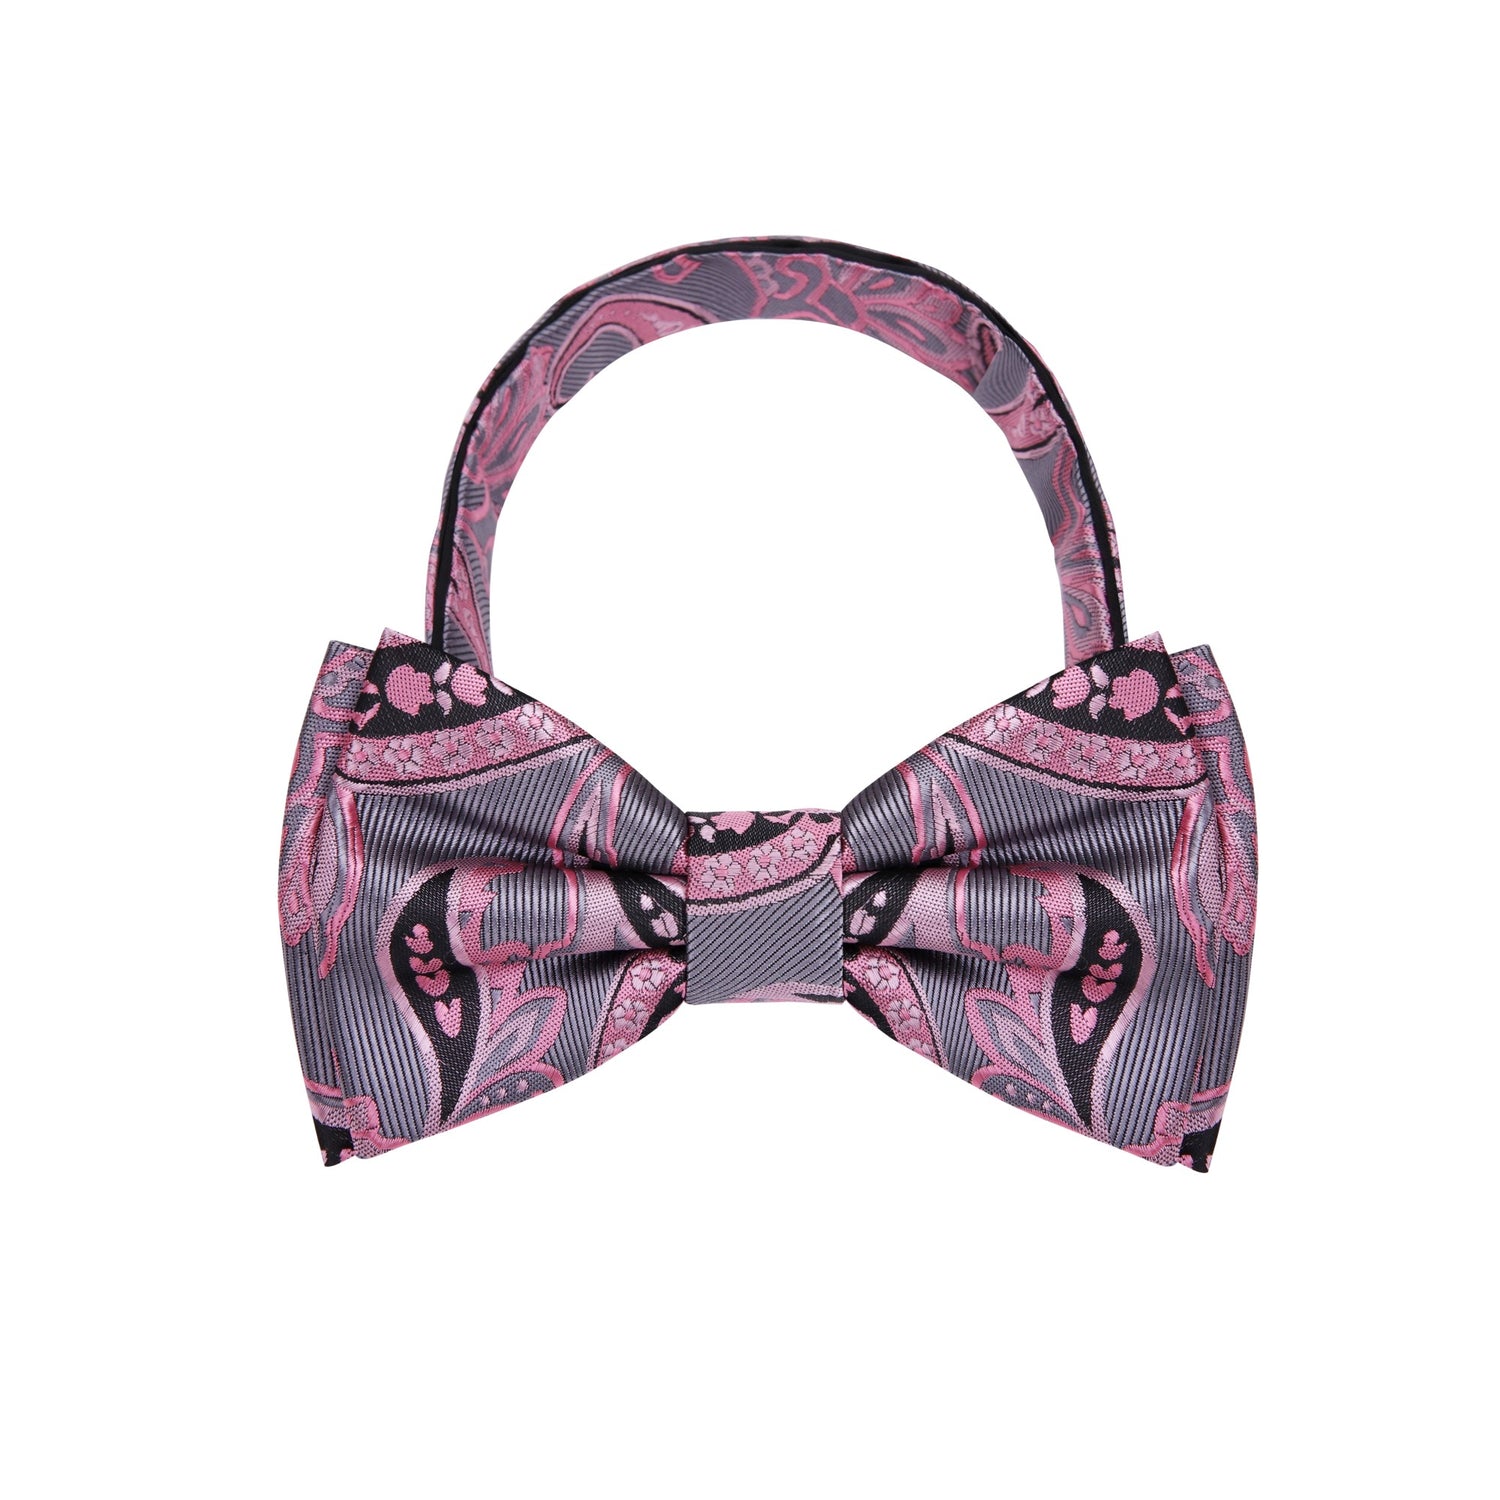 Silver, Pink and Black Paisley Bow Tie Pre Tied